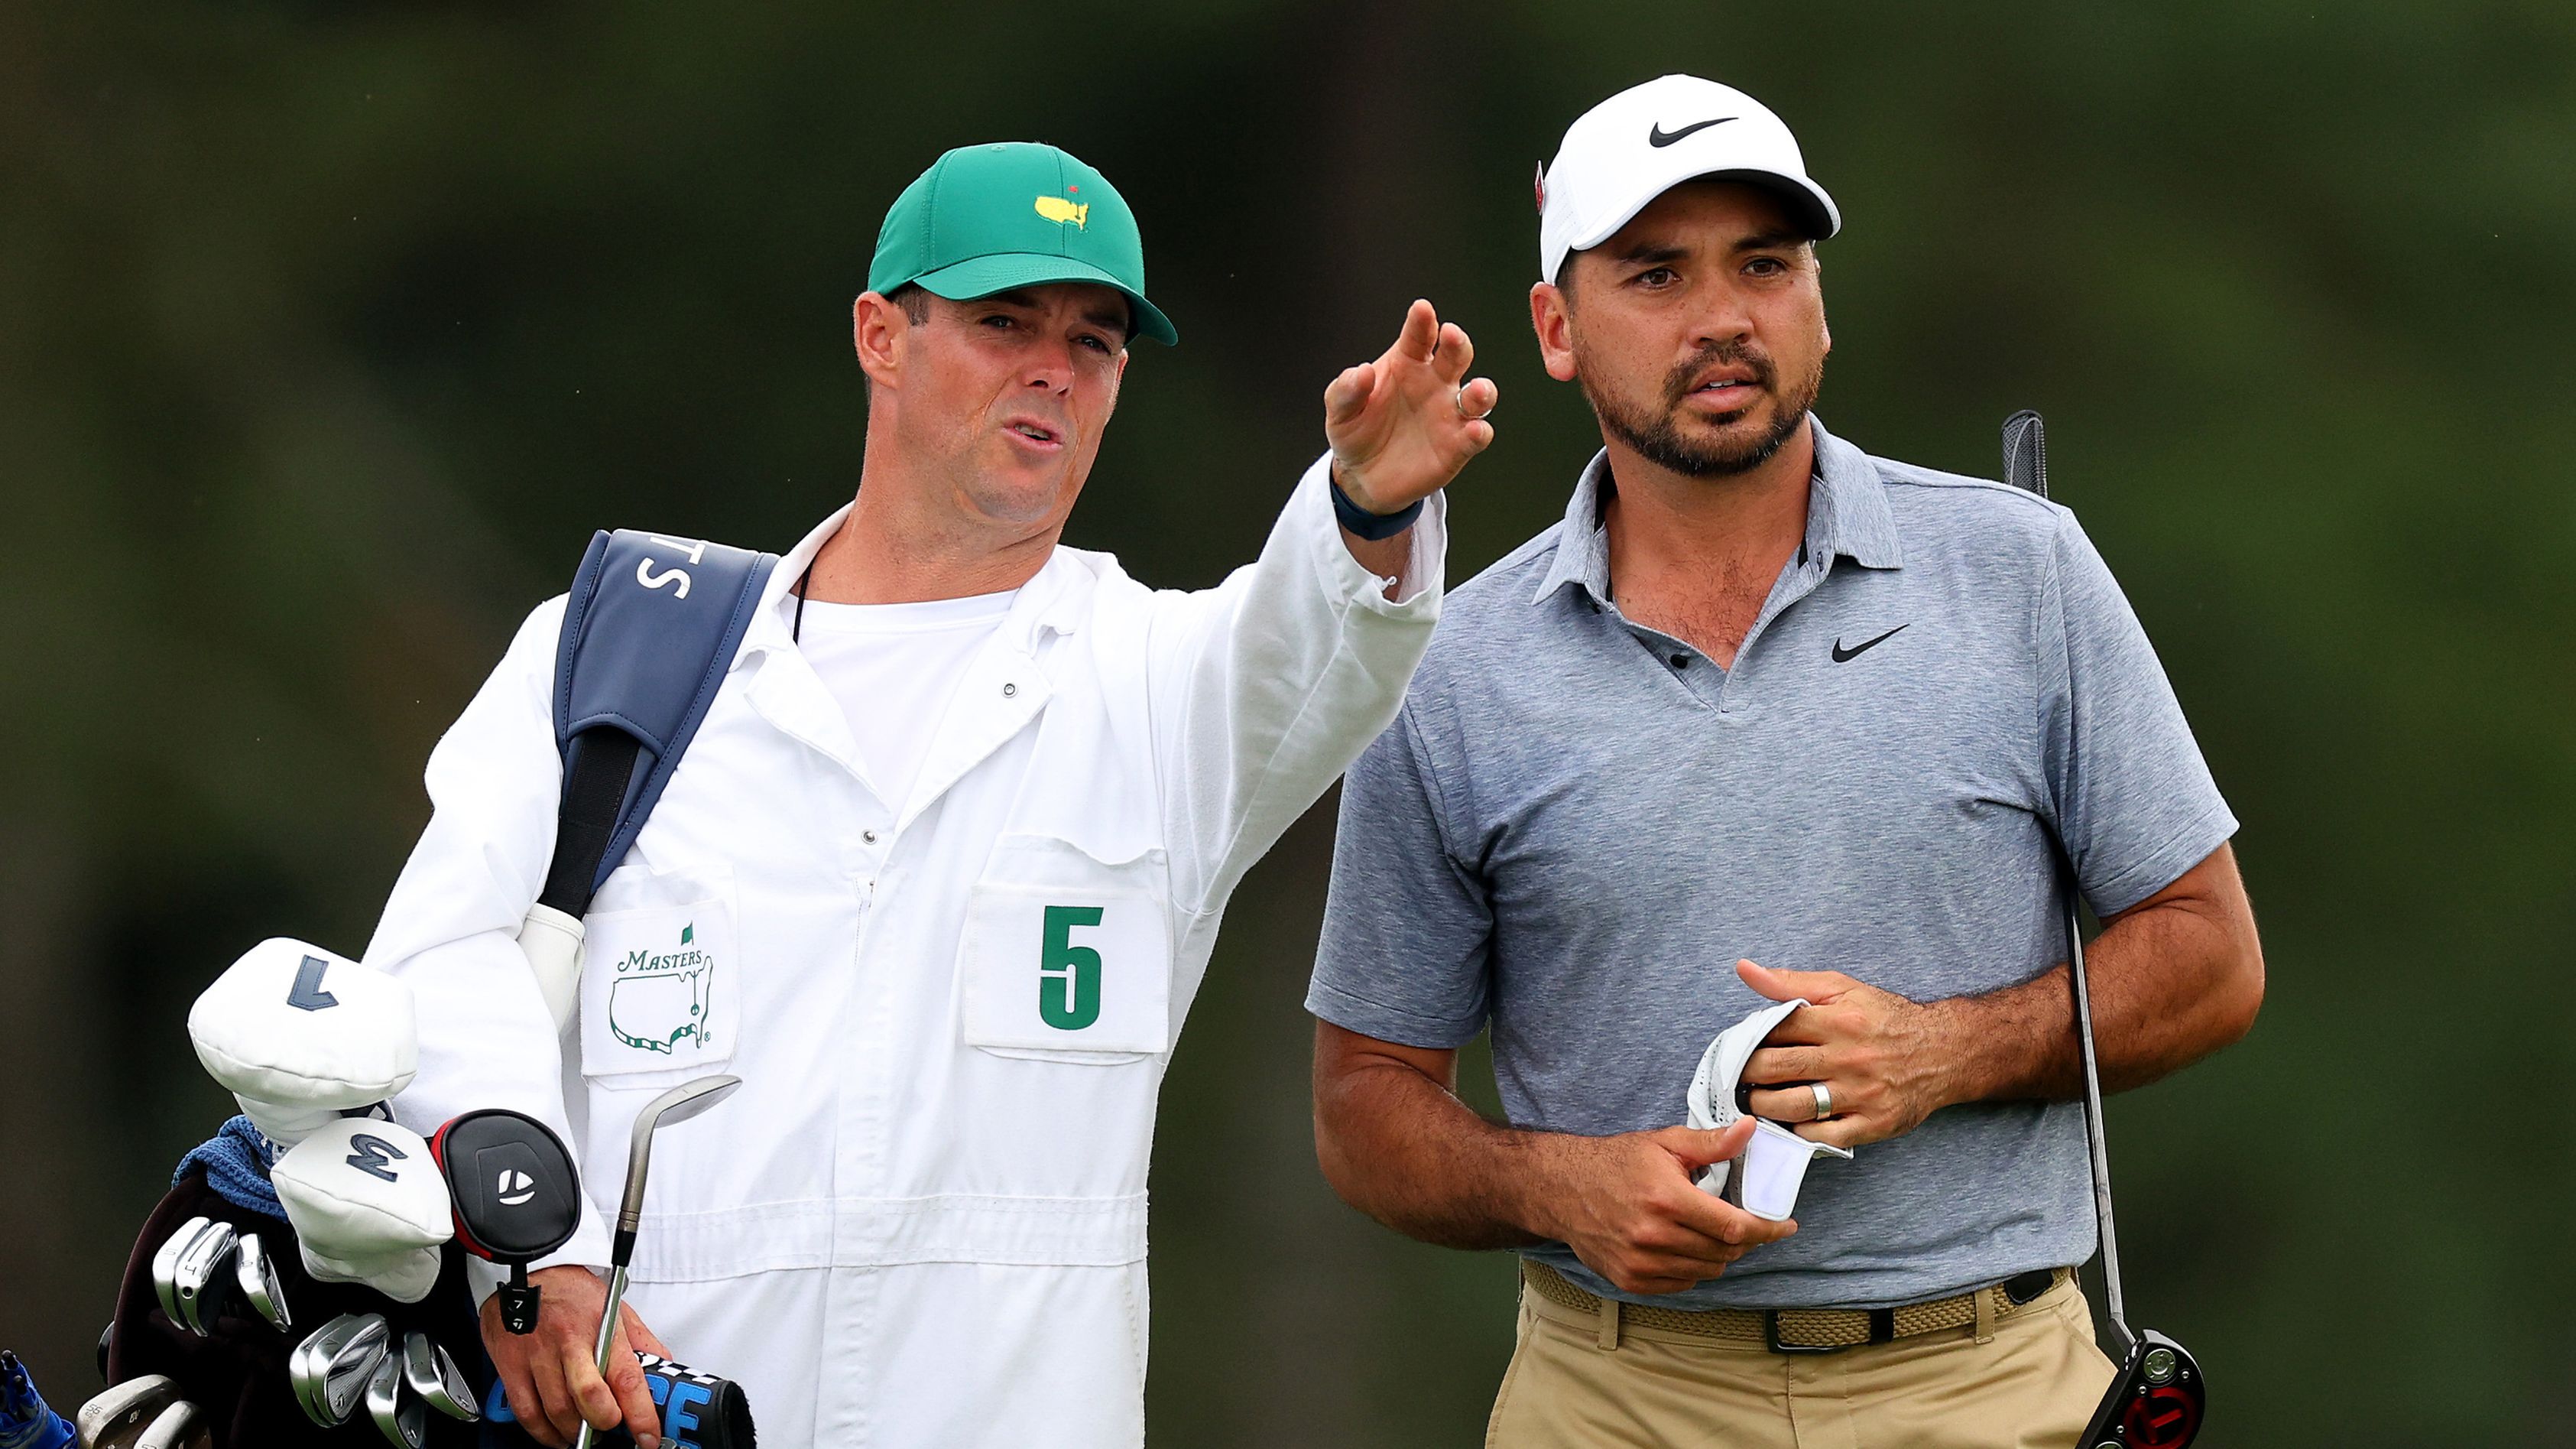 Jason Day to rely heavily on his caddie after skipping practice rounds ahead of PGA Championship